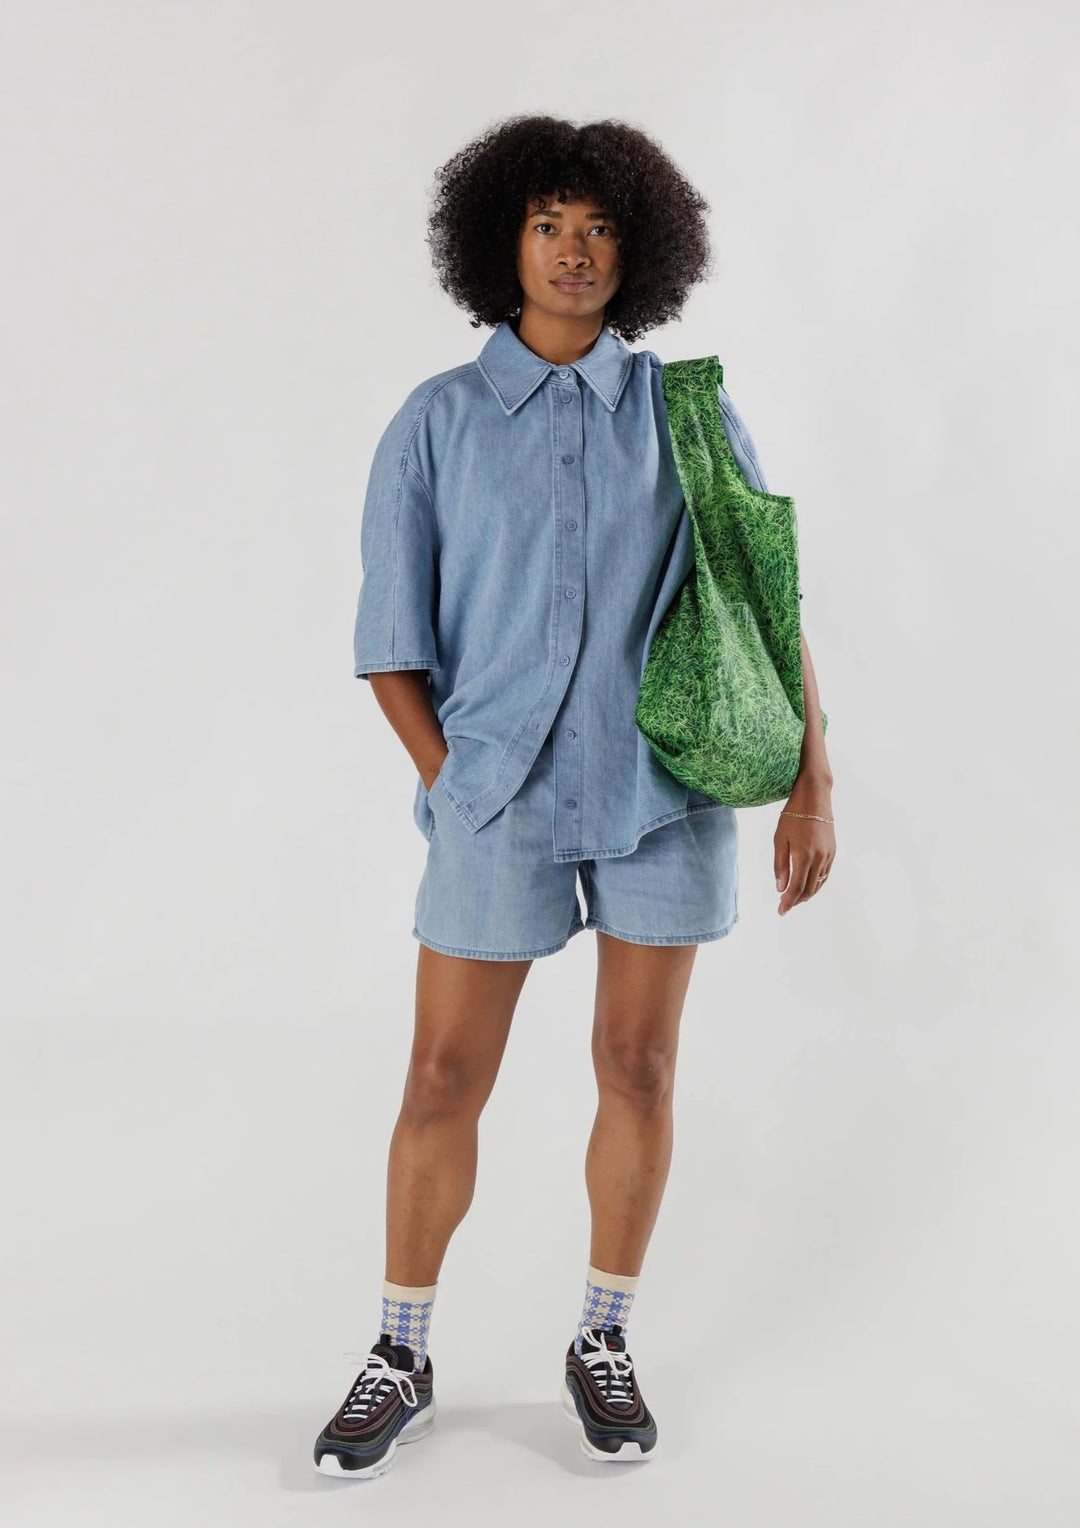 Women wearing a denim shirt and shorts and holding a green grass printed tote bag